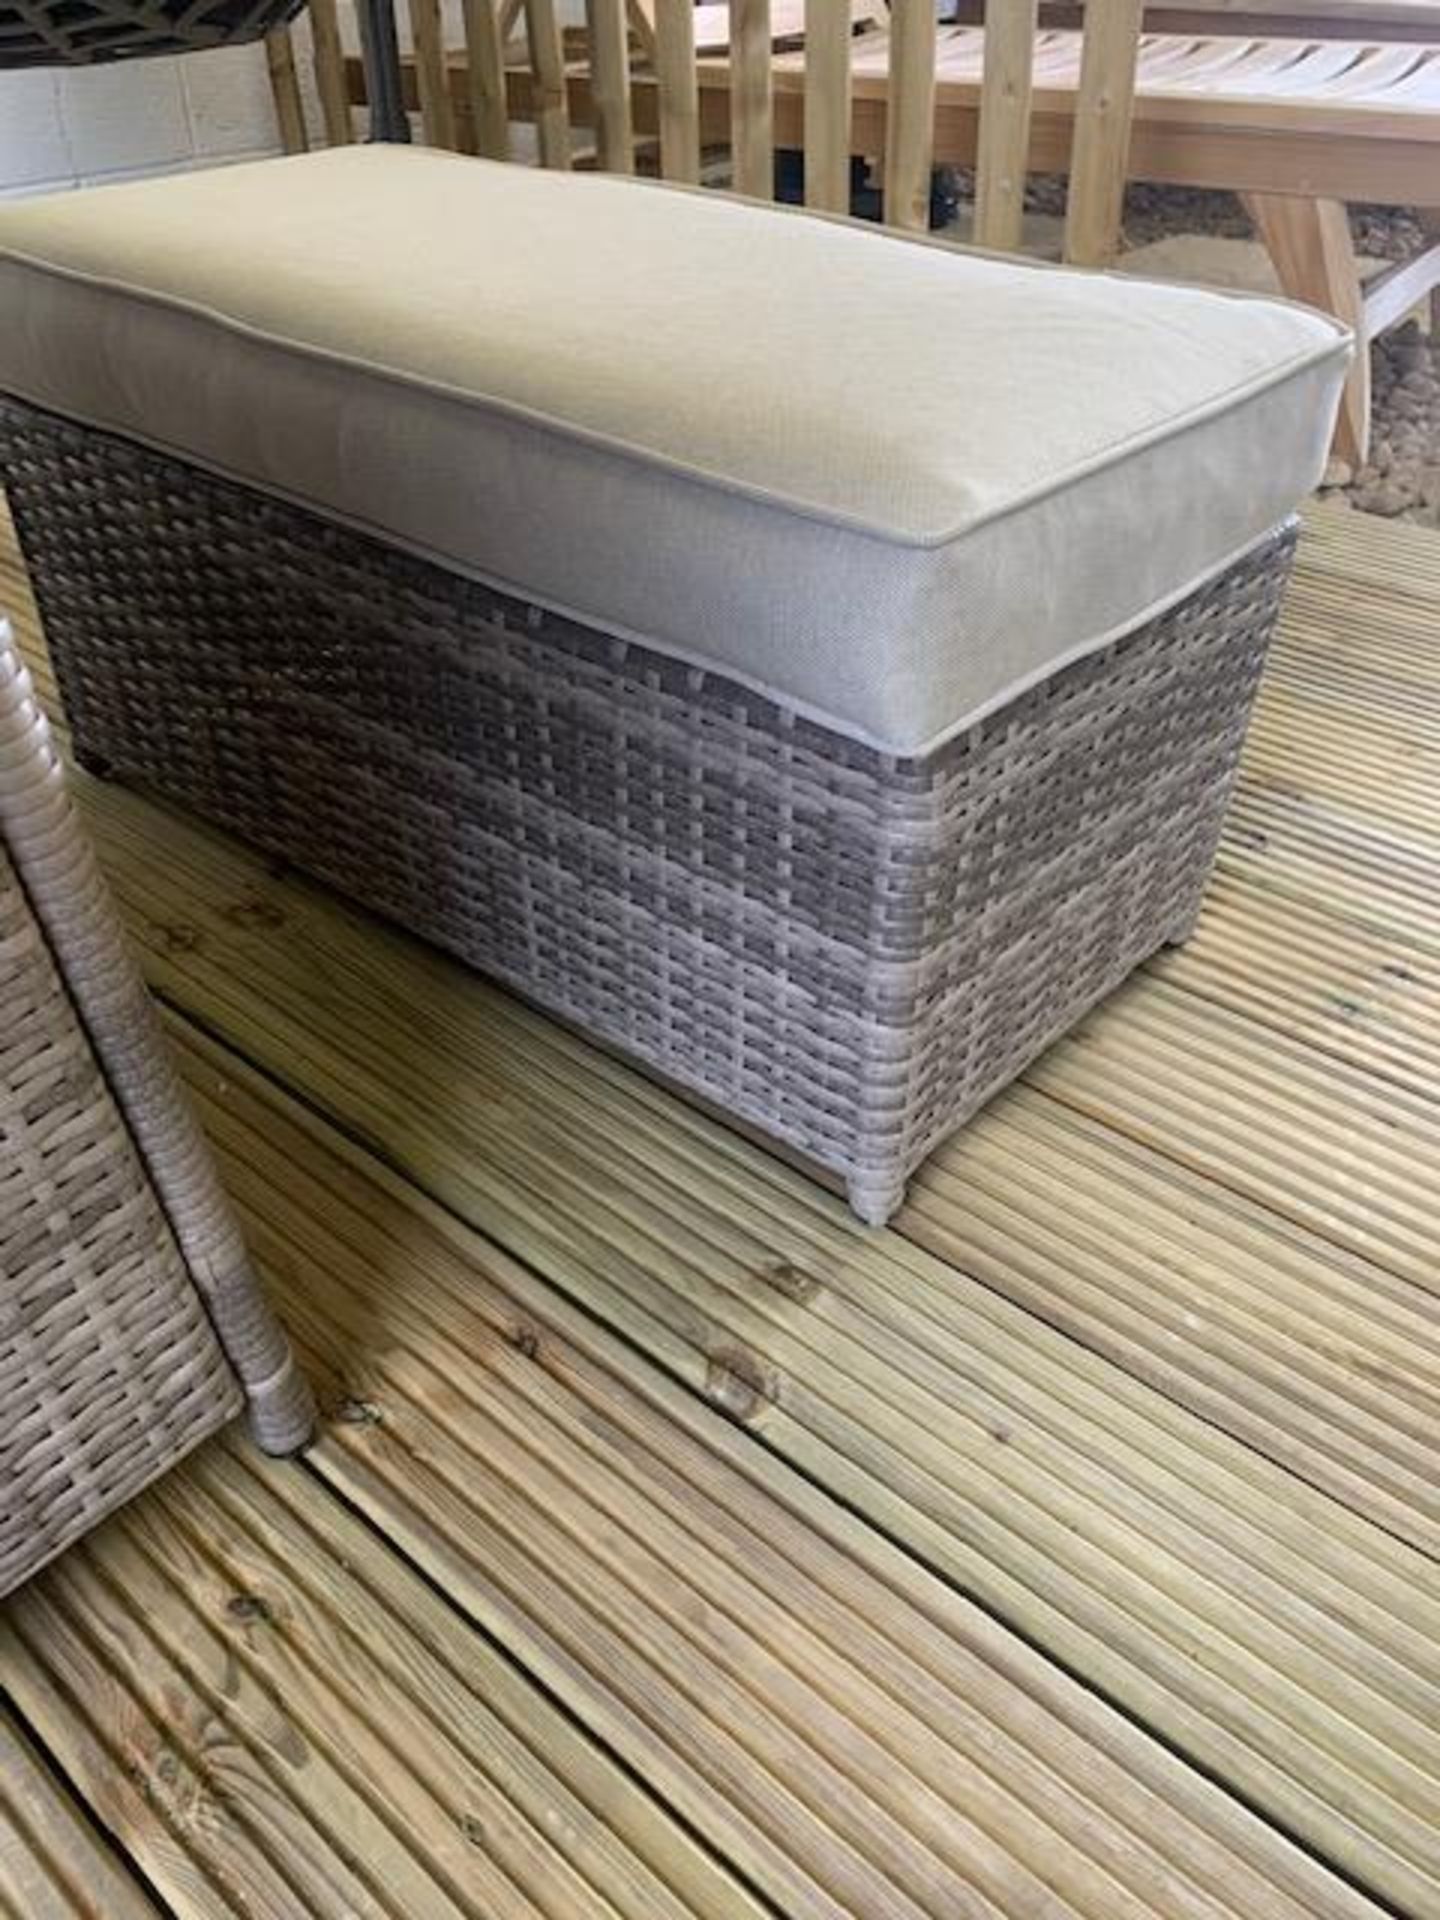 + VAT Brand New SRP £3299.99 Luxury 8 Seater Light Grey Rattan Corner Dining Set With Gas Fire - Image 5 of 6